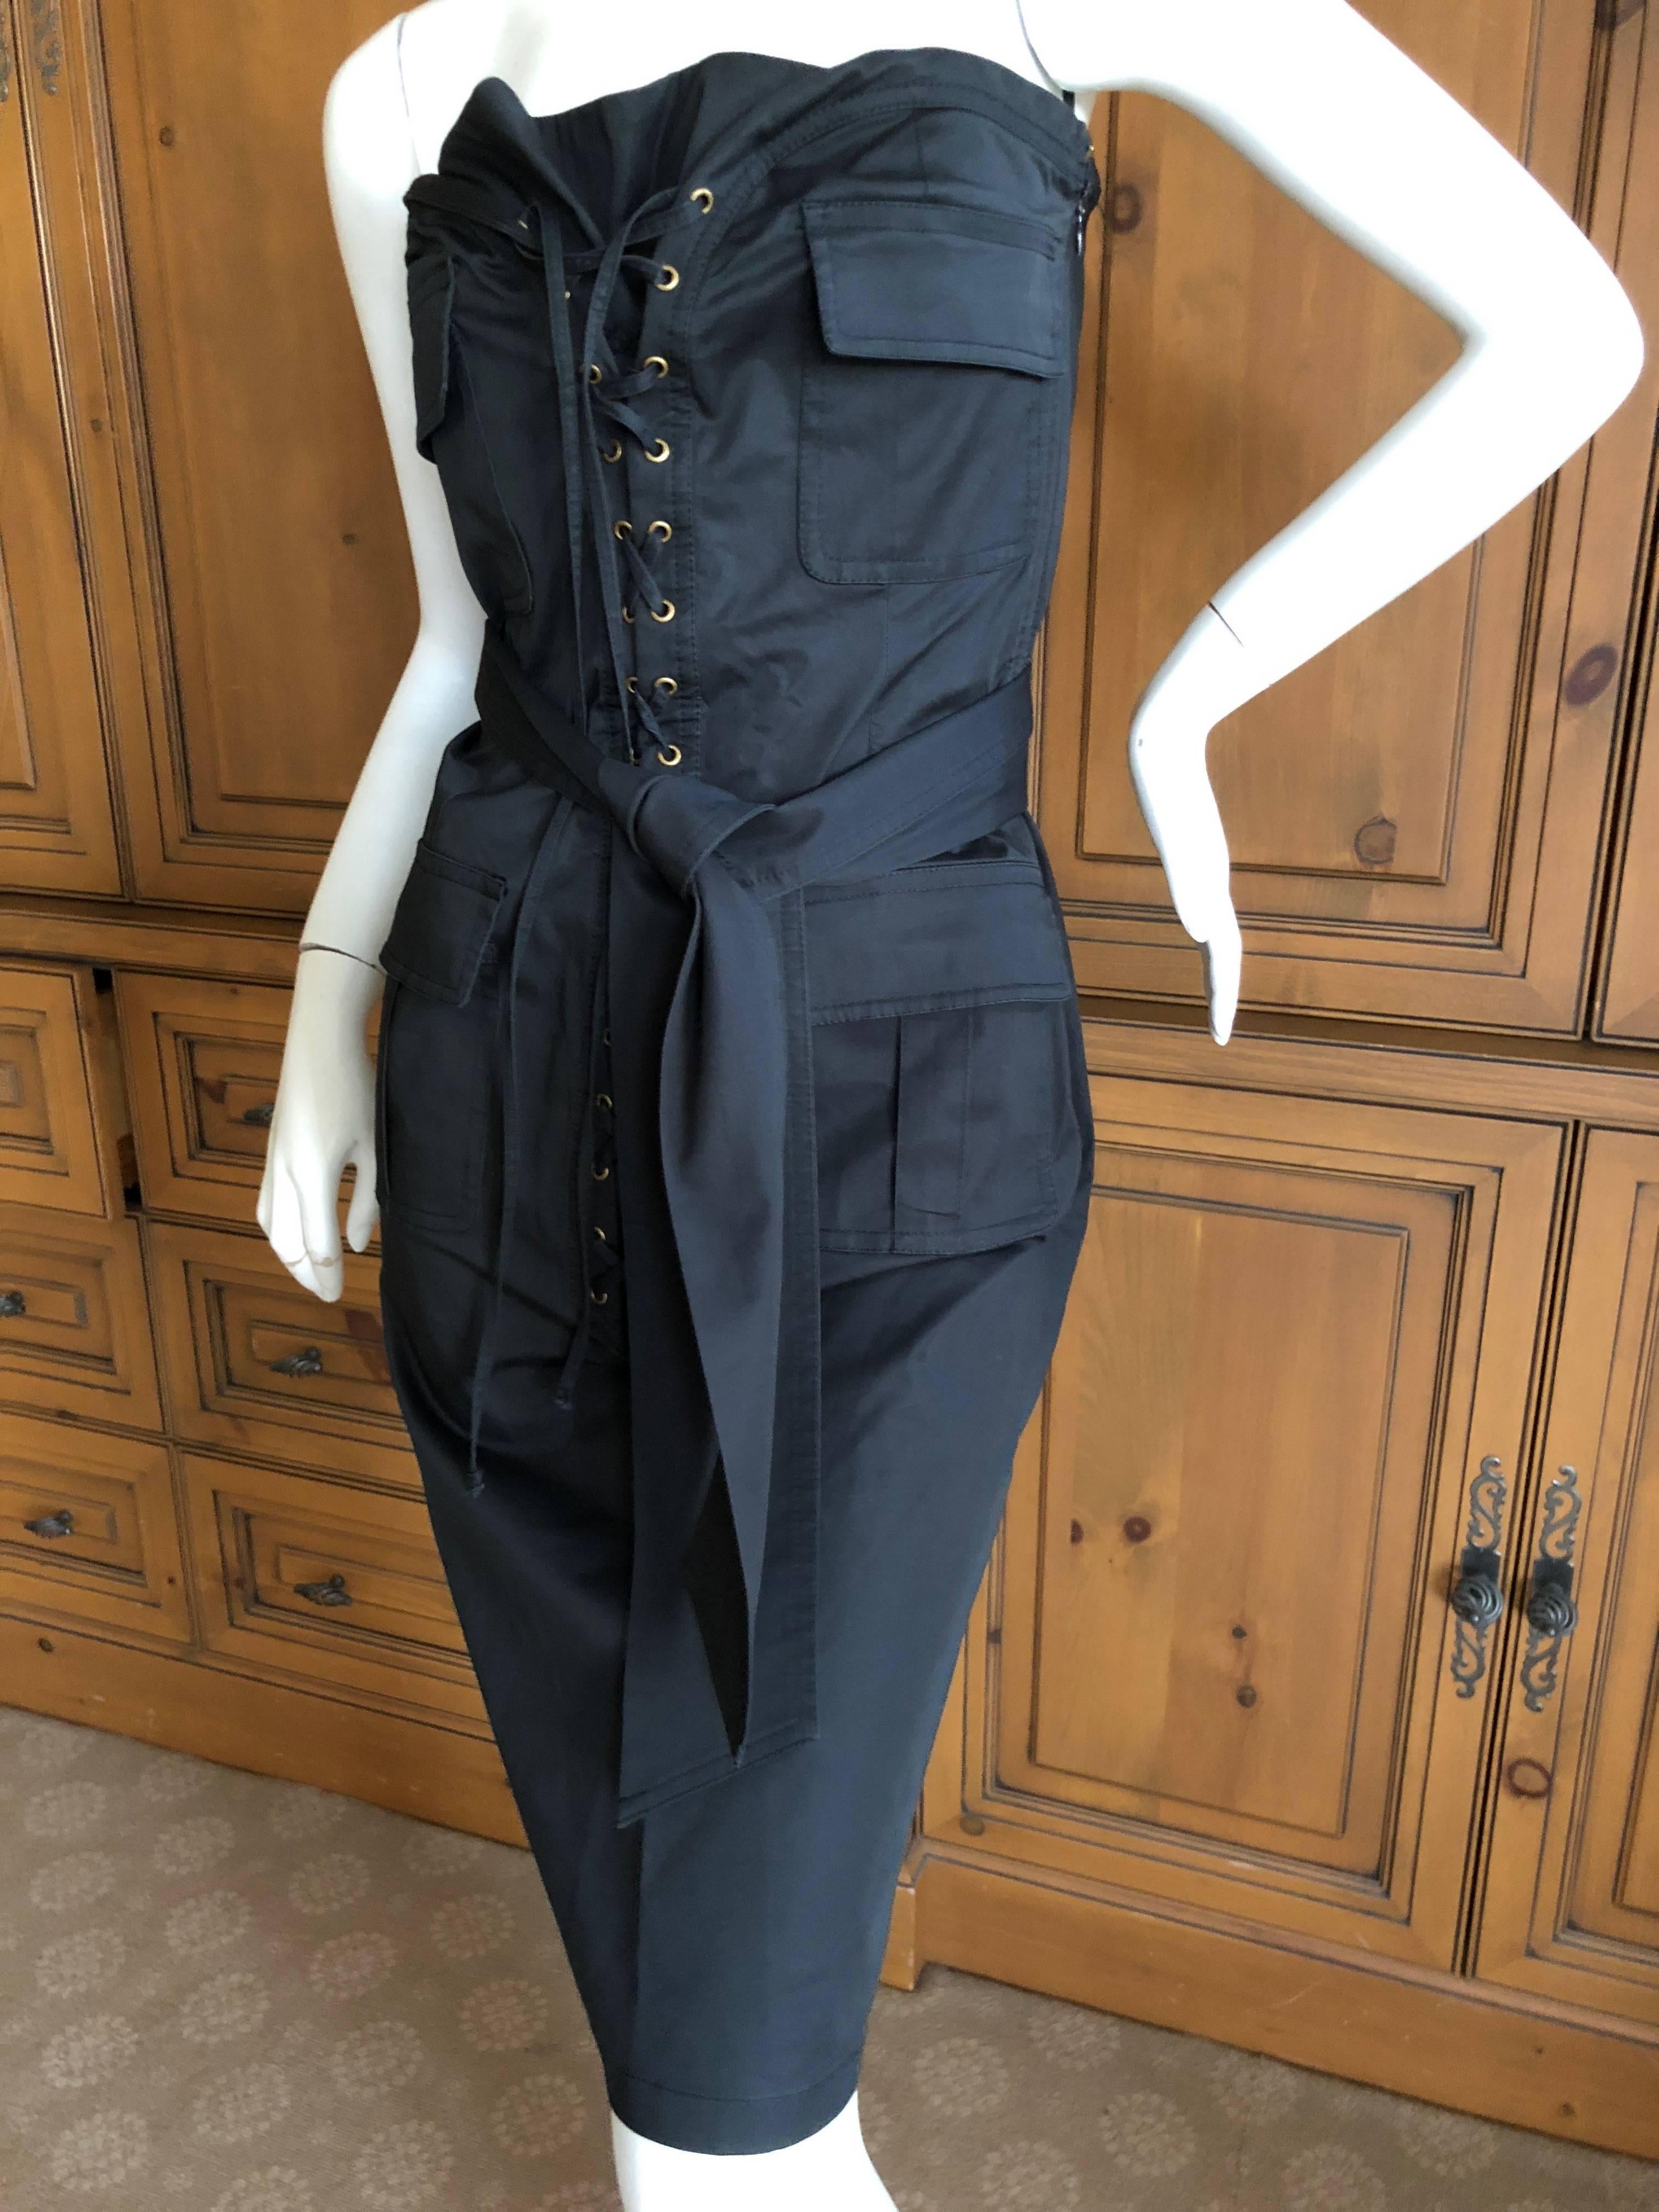 Yves Saint Laurent by Tom Ford Strapless Black Safari Dress with Corset Lacing  For Sale 4